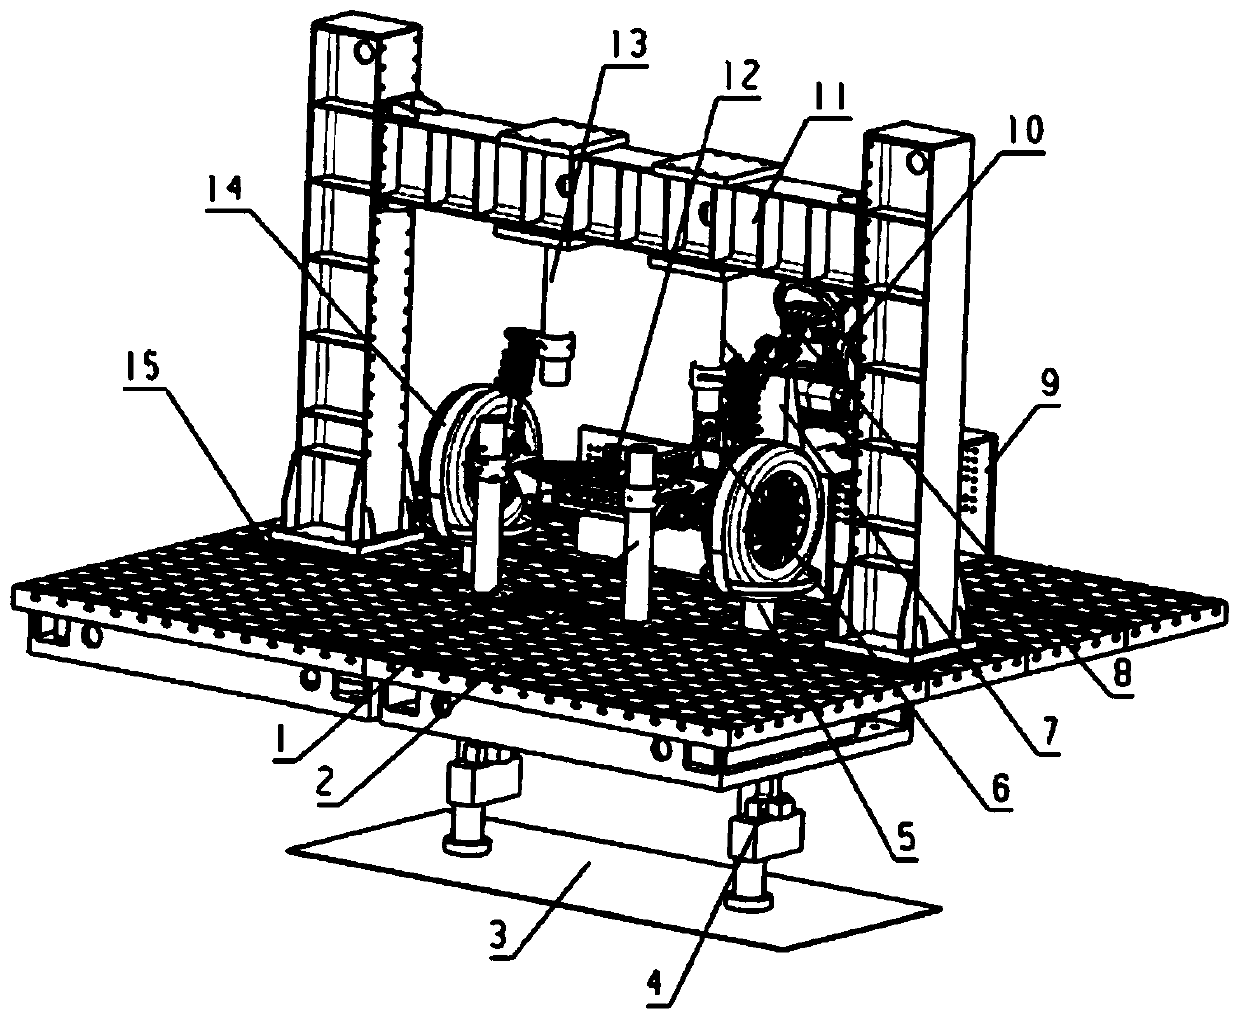 A comprehensive fatigue durability test device and method for a non-driven front suspension assembly